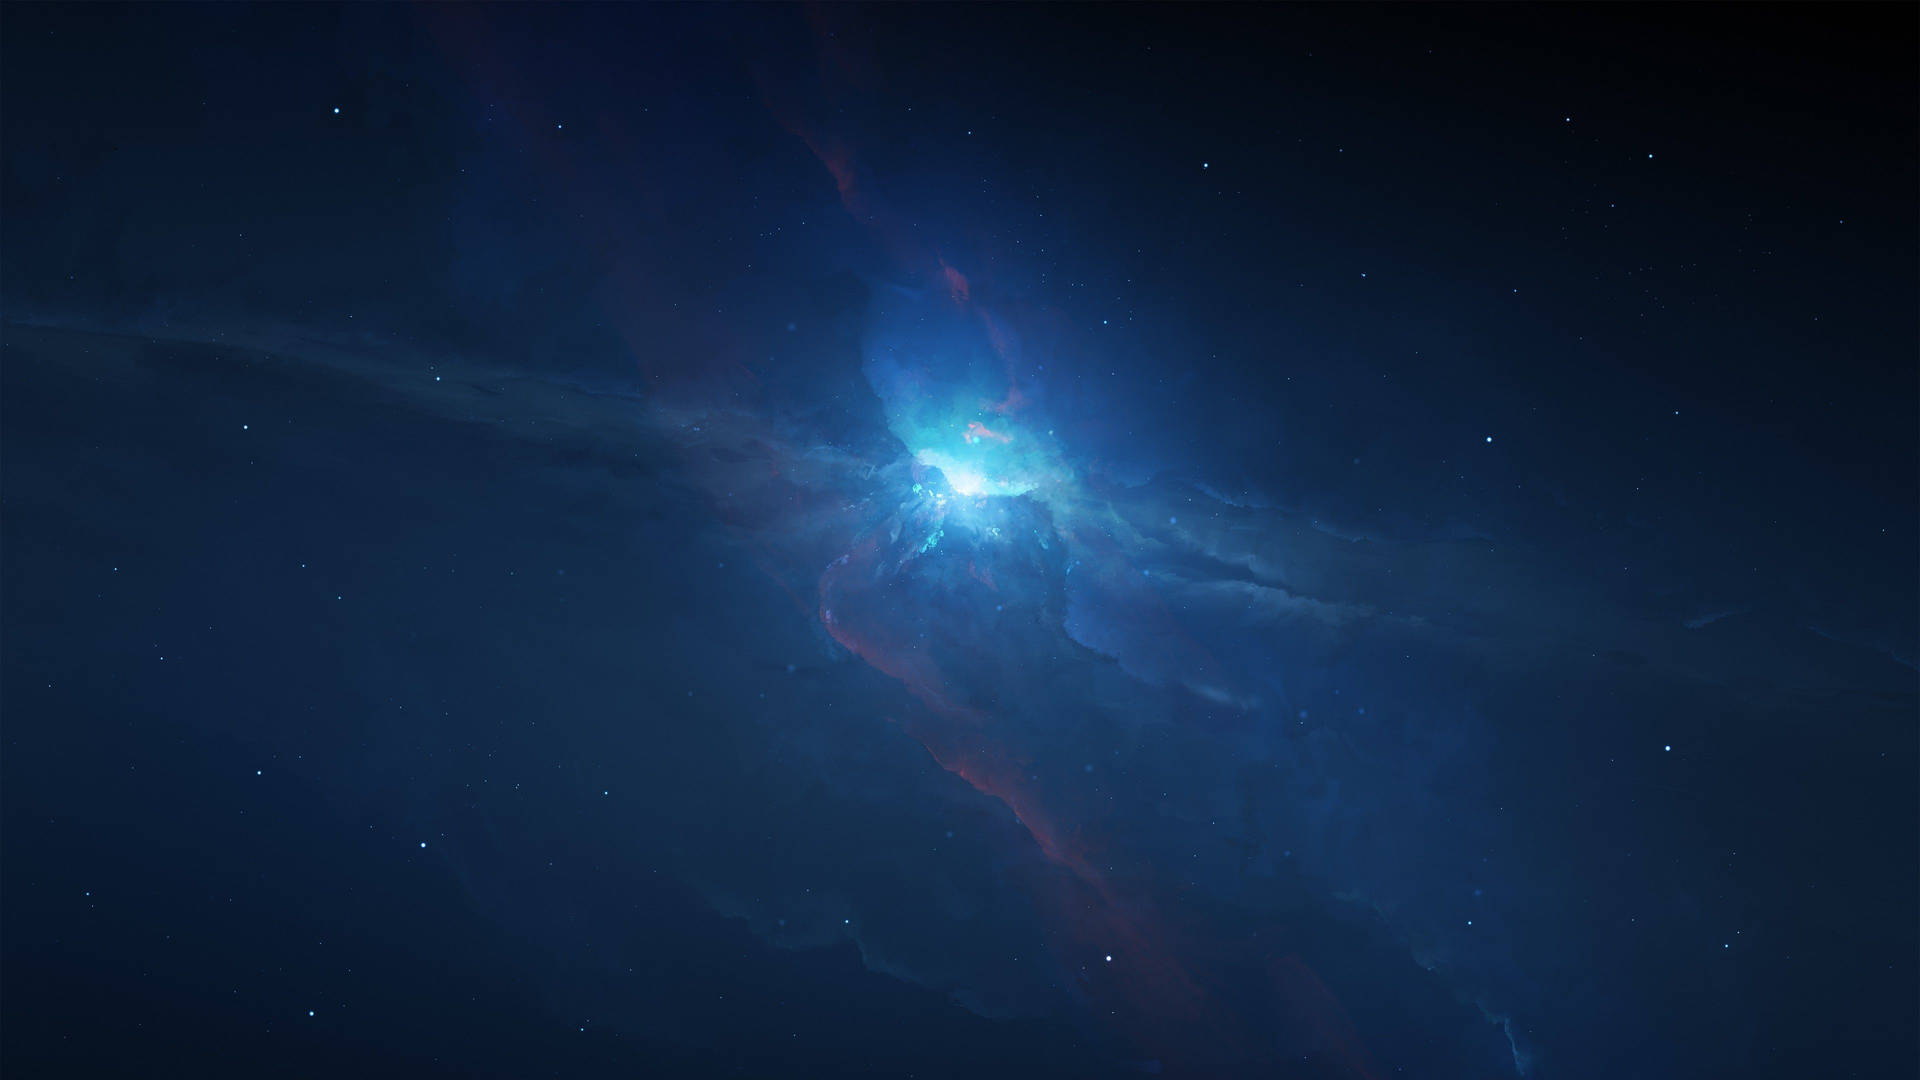 4k Space 3840X2160 Wallpaper and Background Image